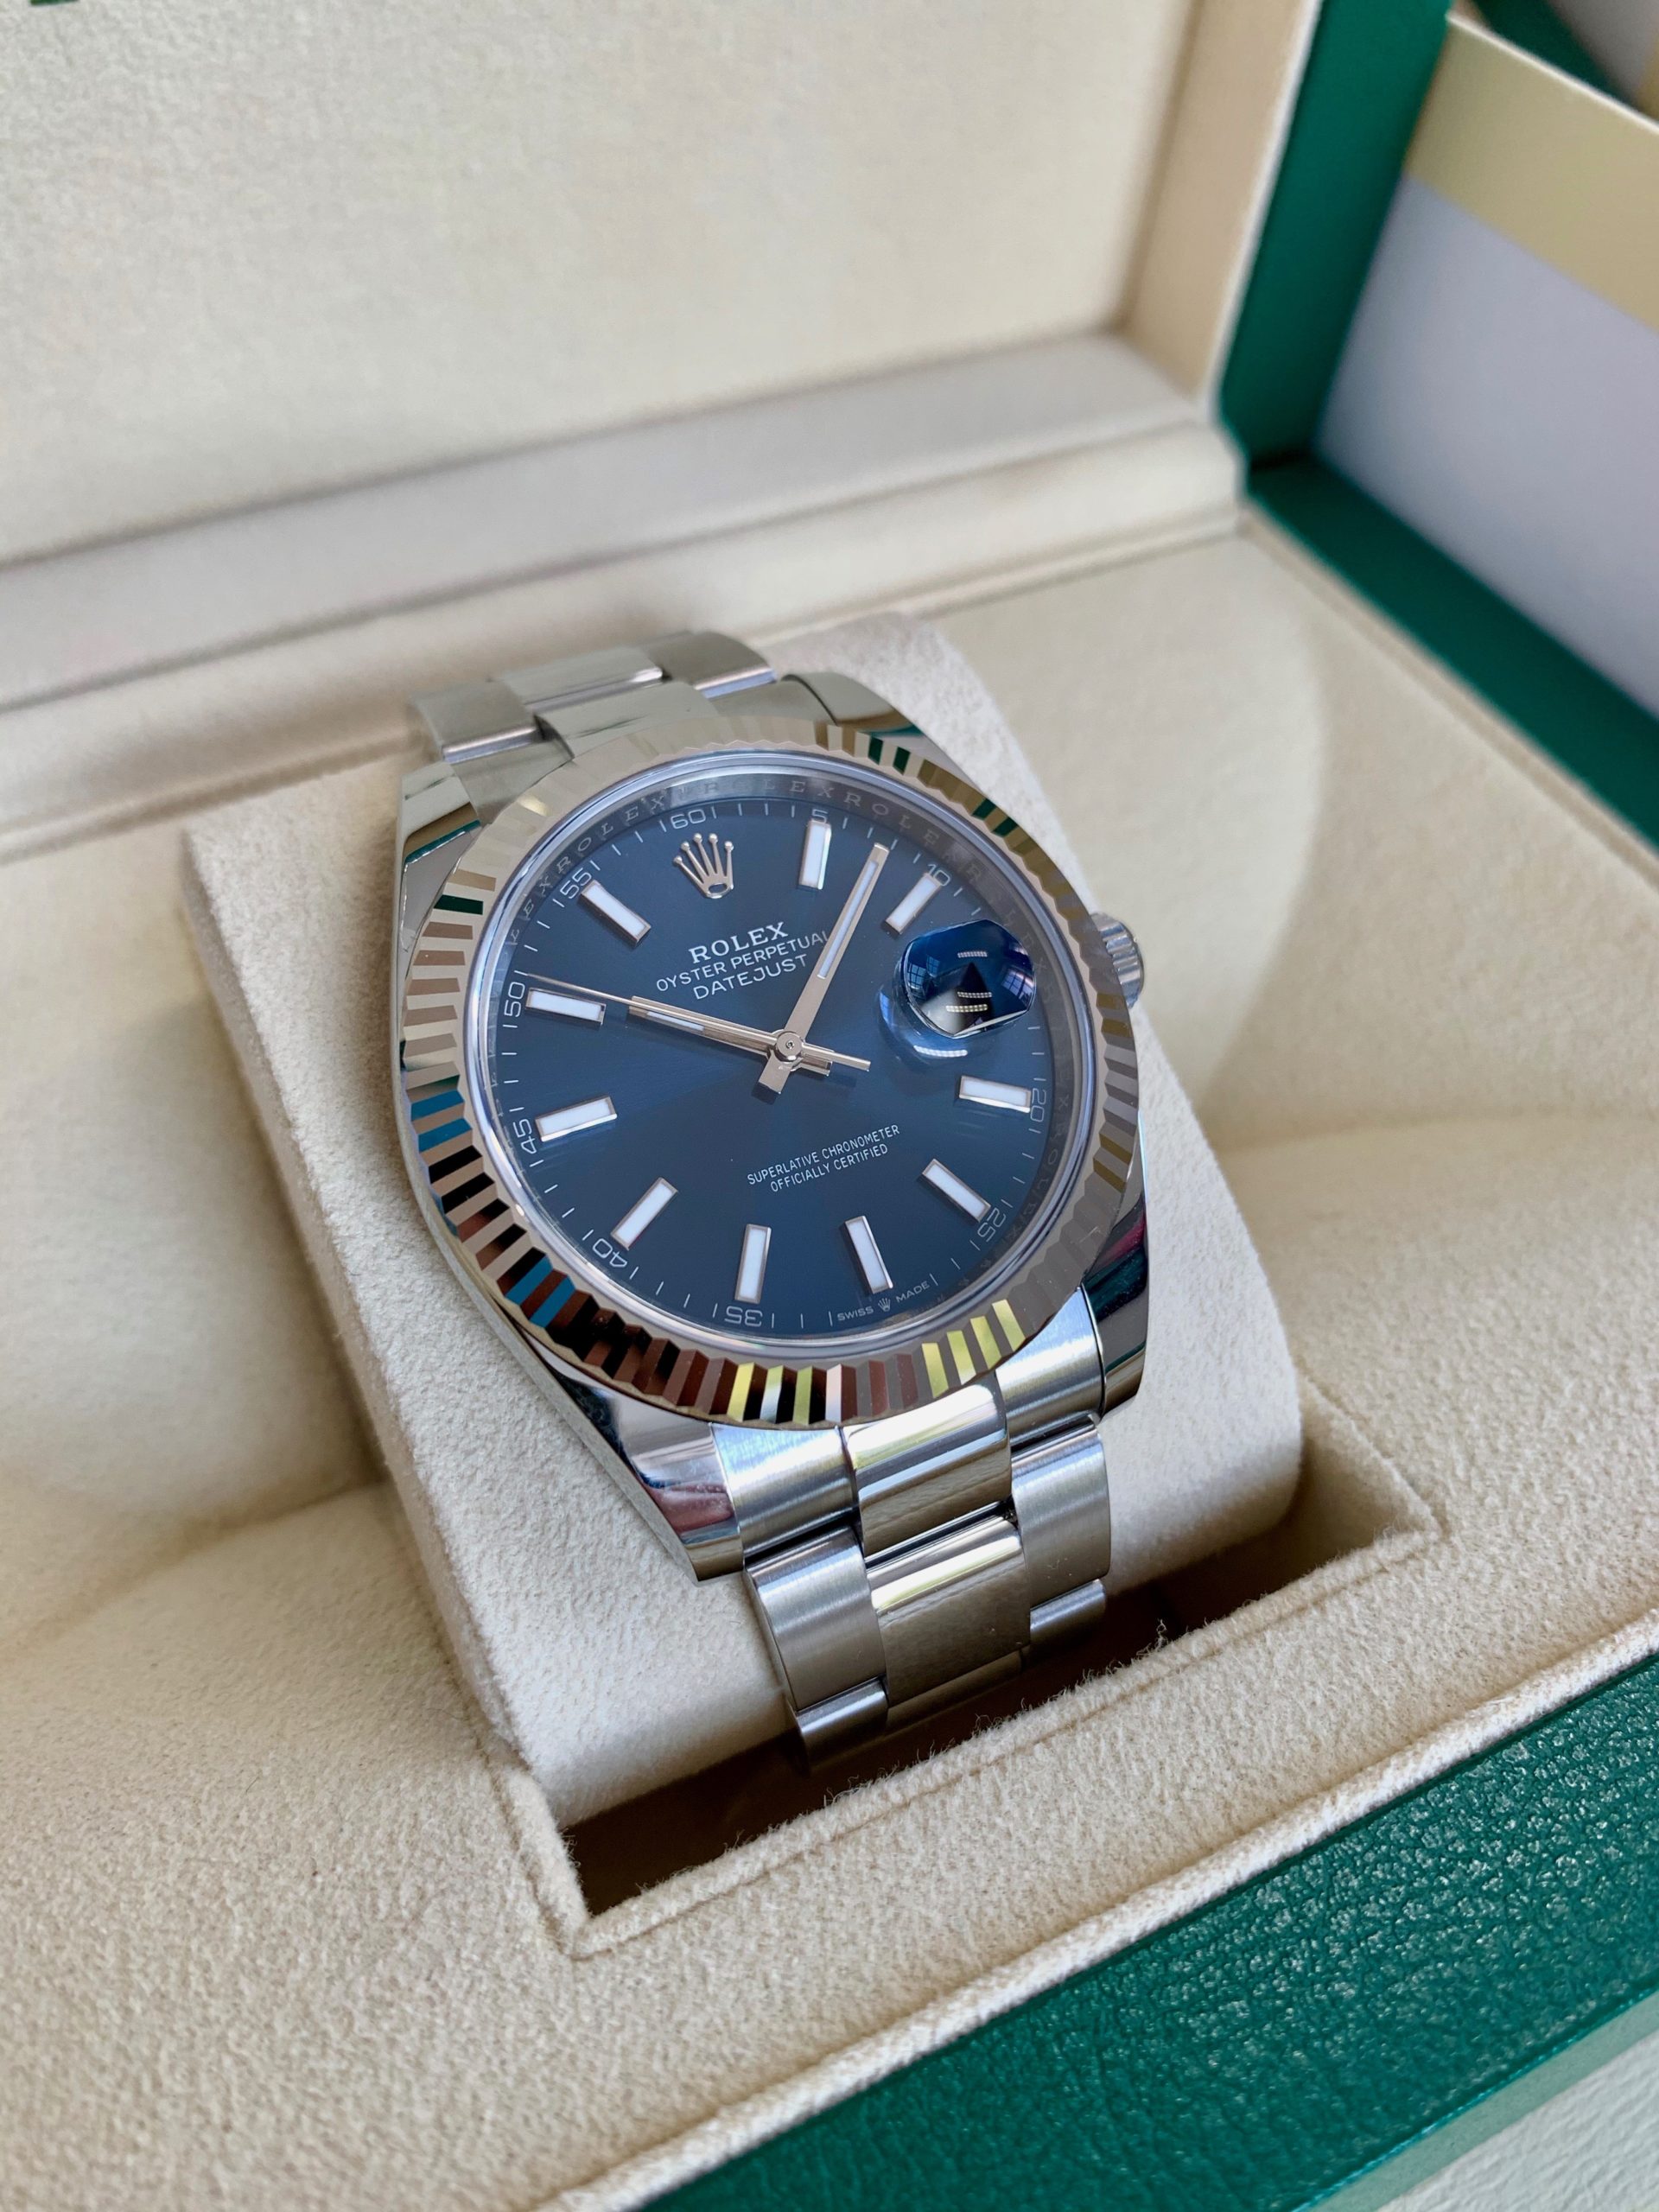 ROLEX DATEJUST 41 BLUE DIAL STAINLESS STEEL 126334 - Carr Watches Rolex Datejust 41 Stainless Steel